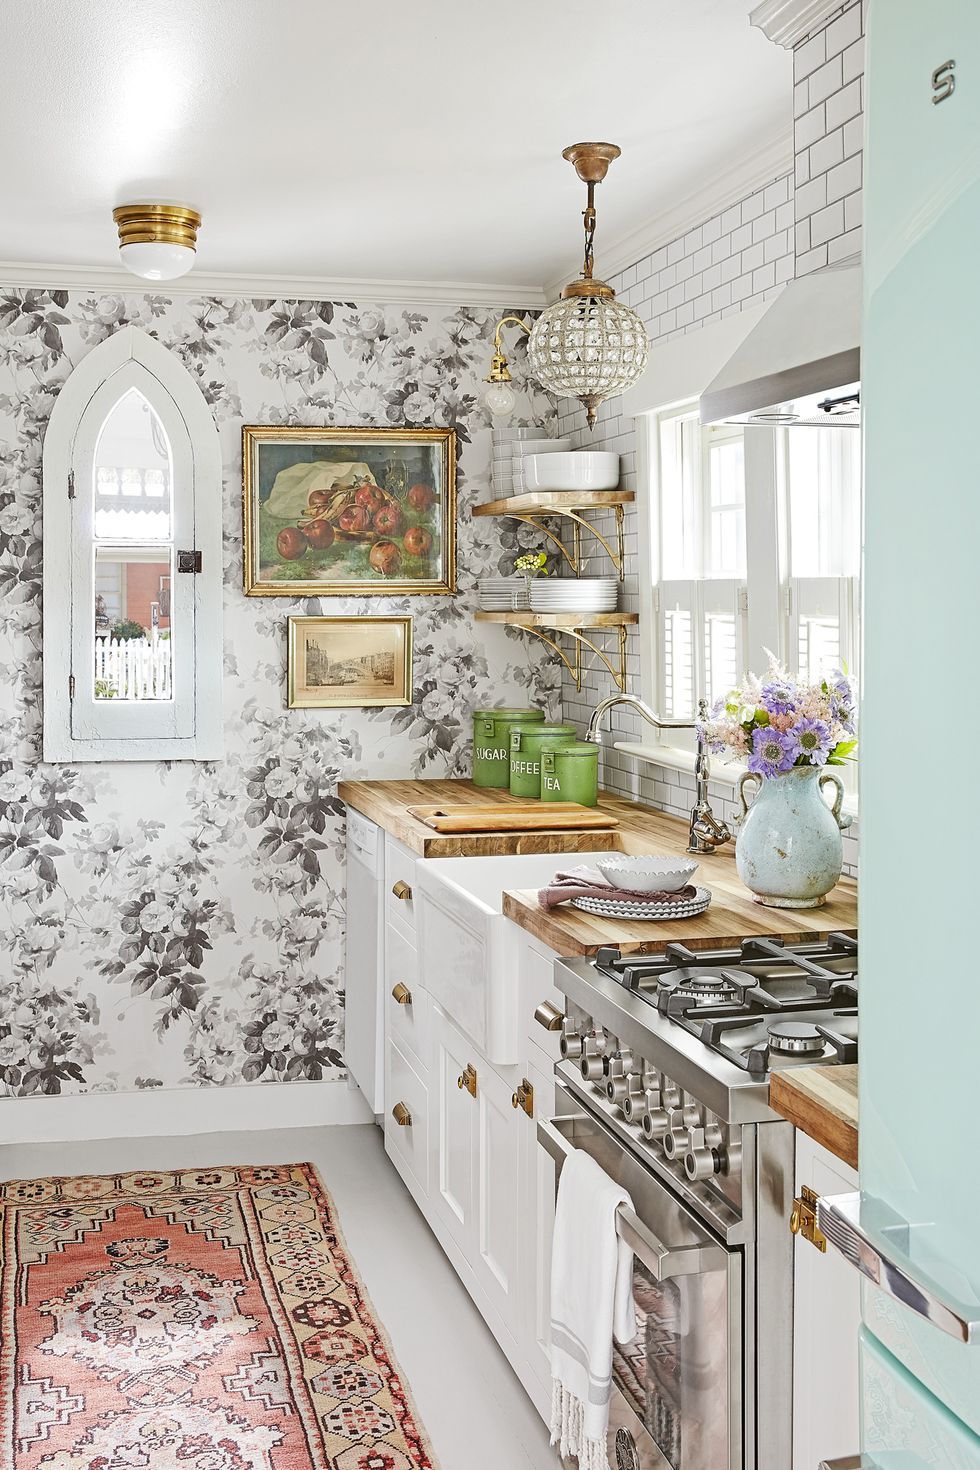 10 Kitchen Wallpaper Ideas you have to see - Daily Dream Decor